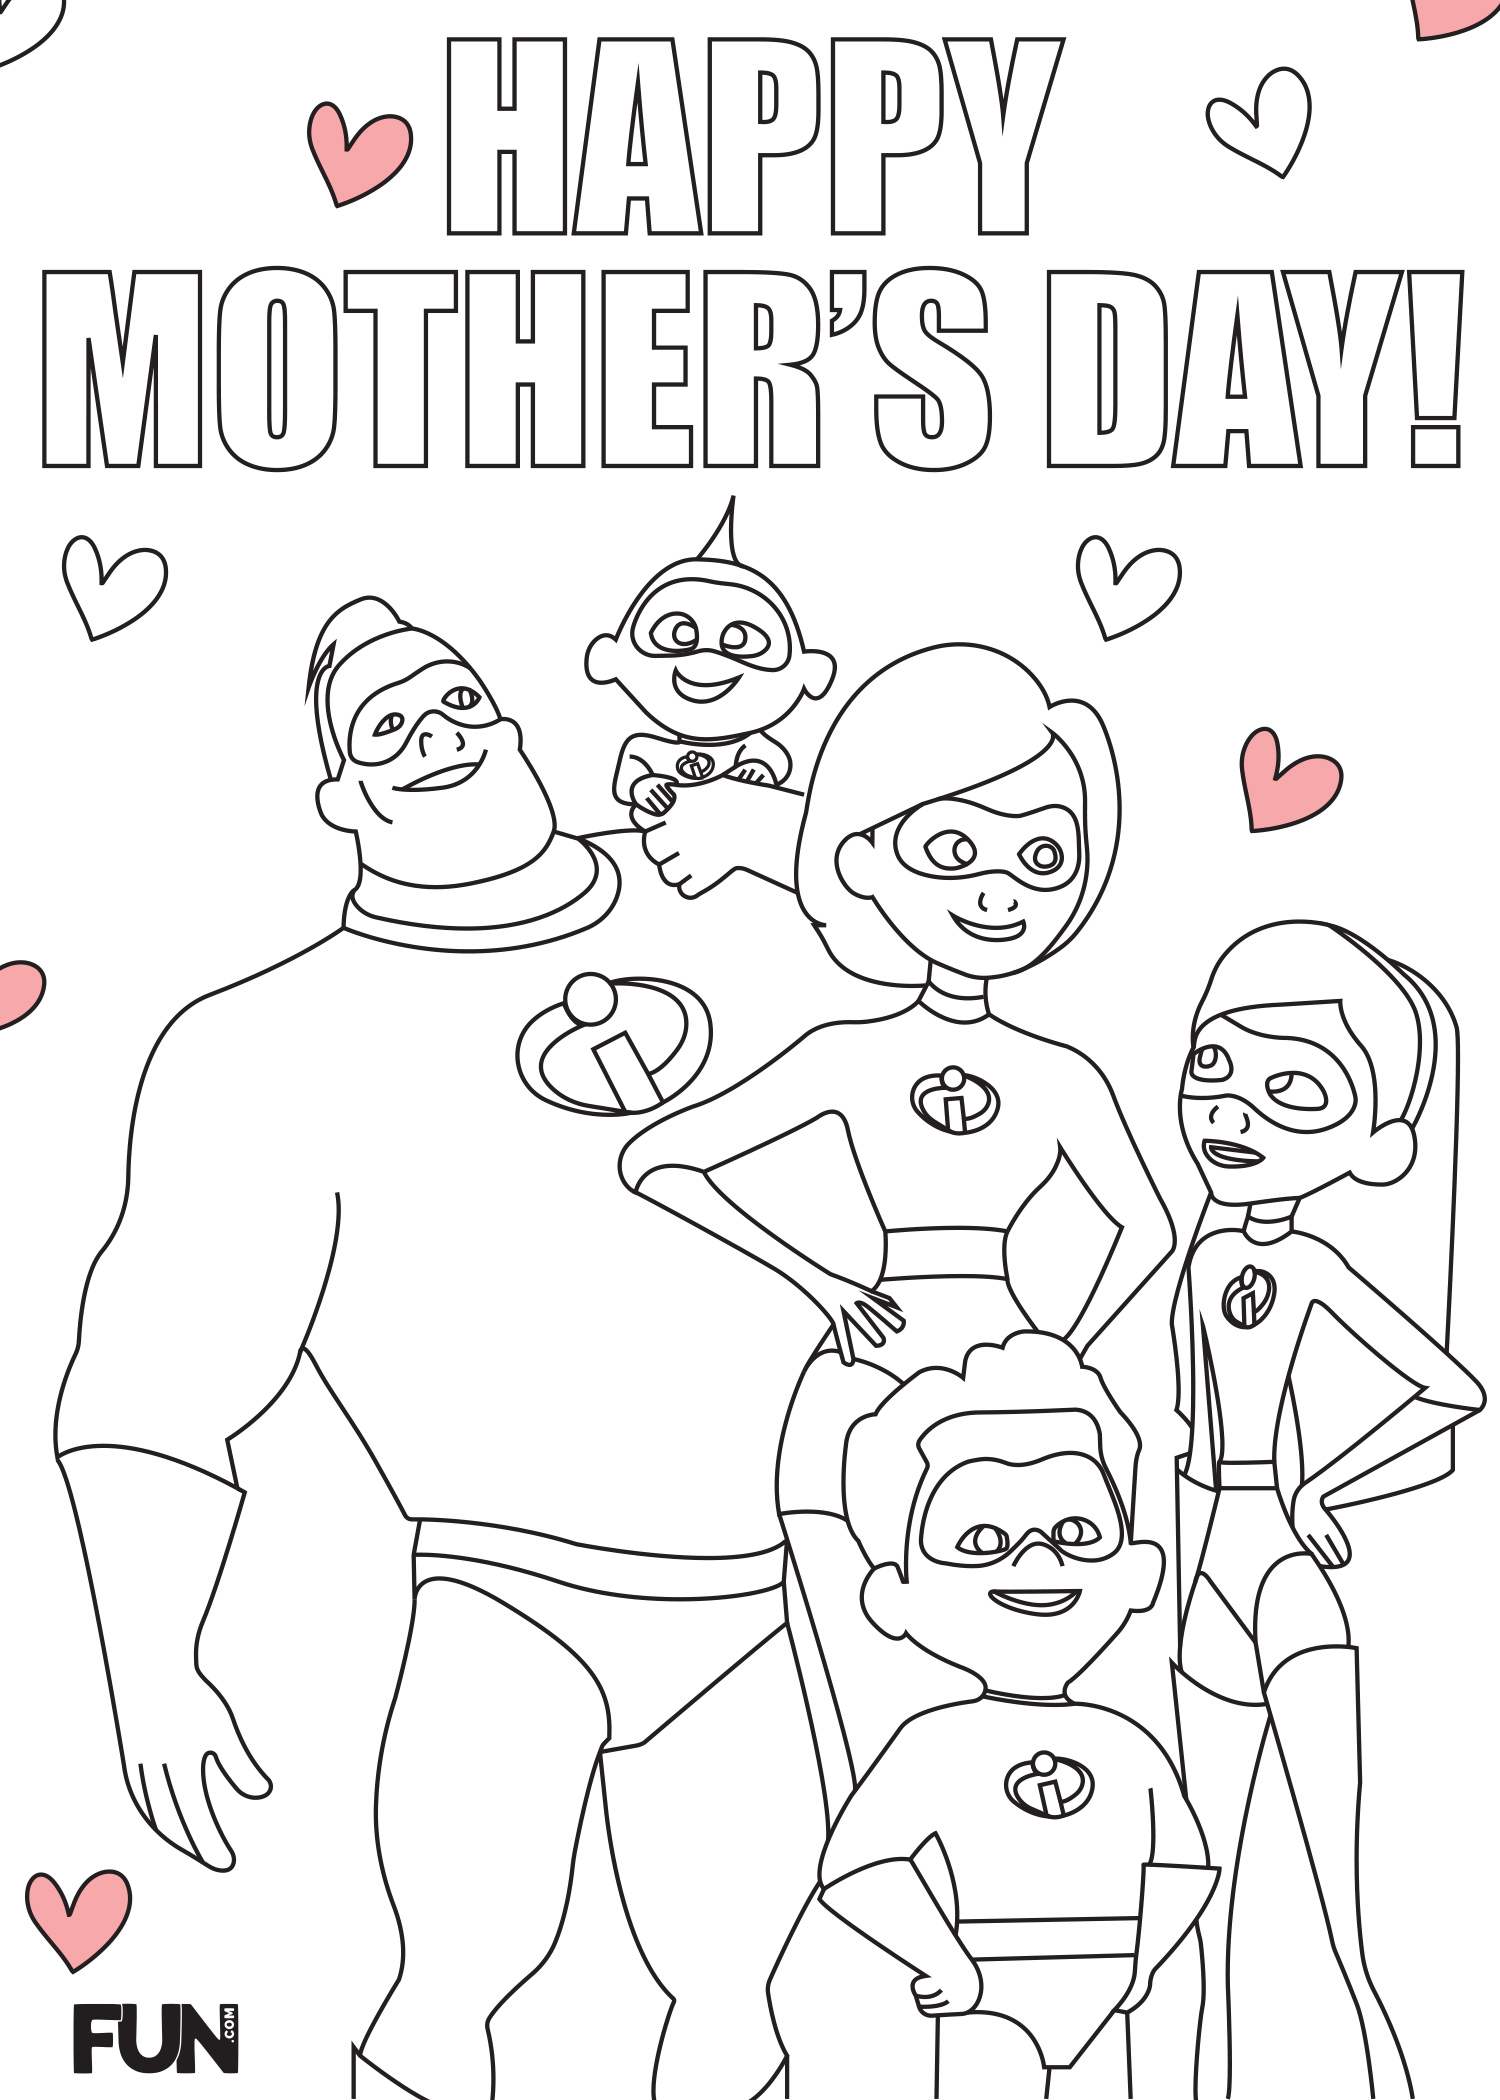 The Incredibles Mother's Day Card